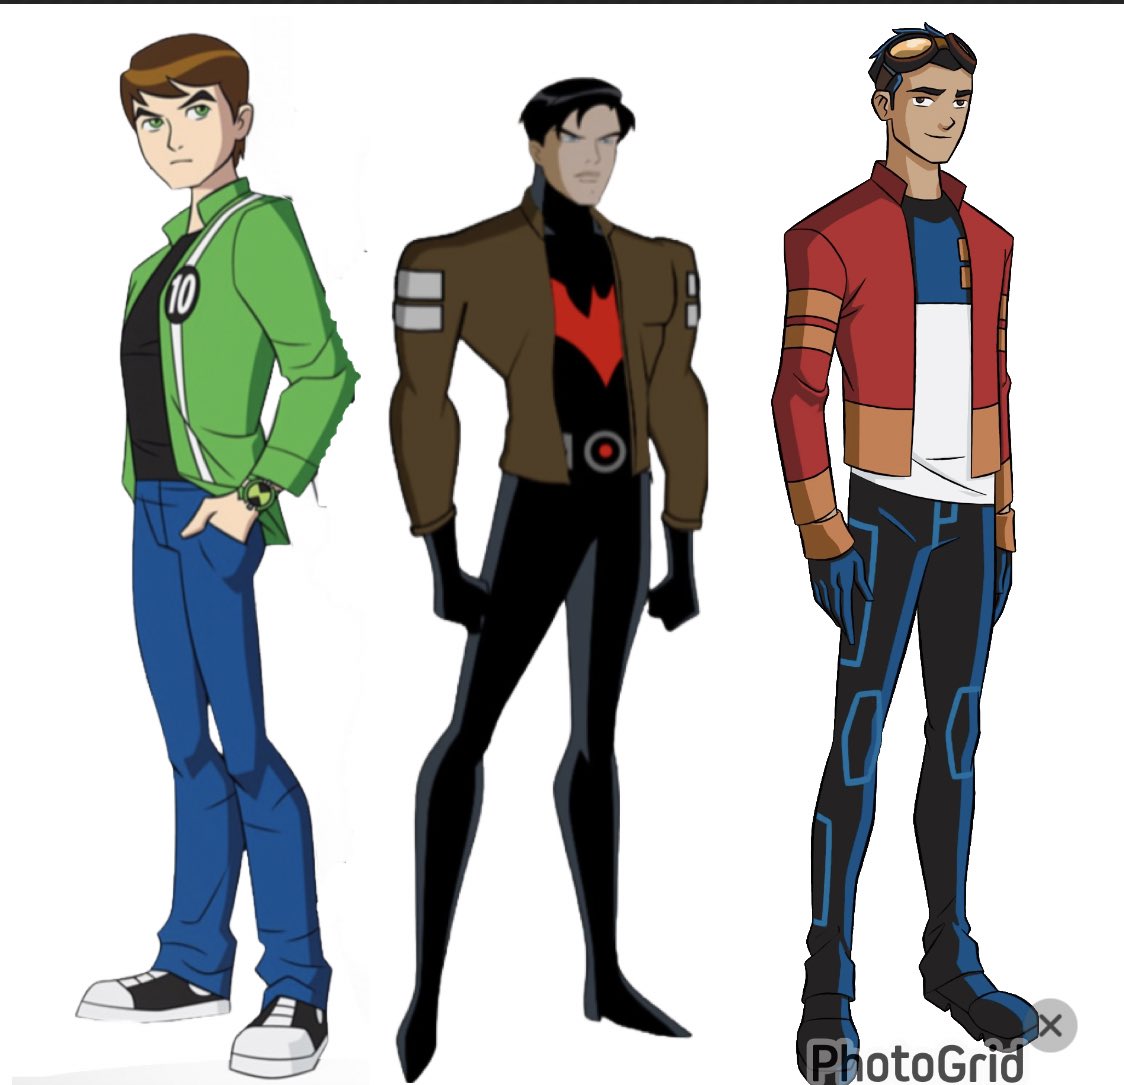 The three musketeers of cool jackets i wanted as a kid(and still do)
#Ben10 #BatmanBeyond #GeneratorRex